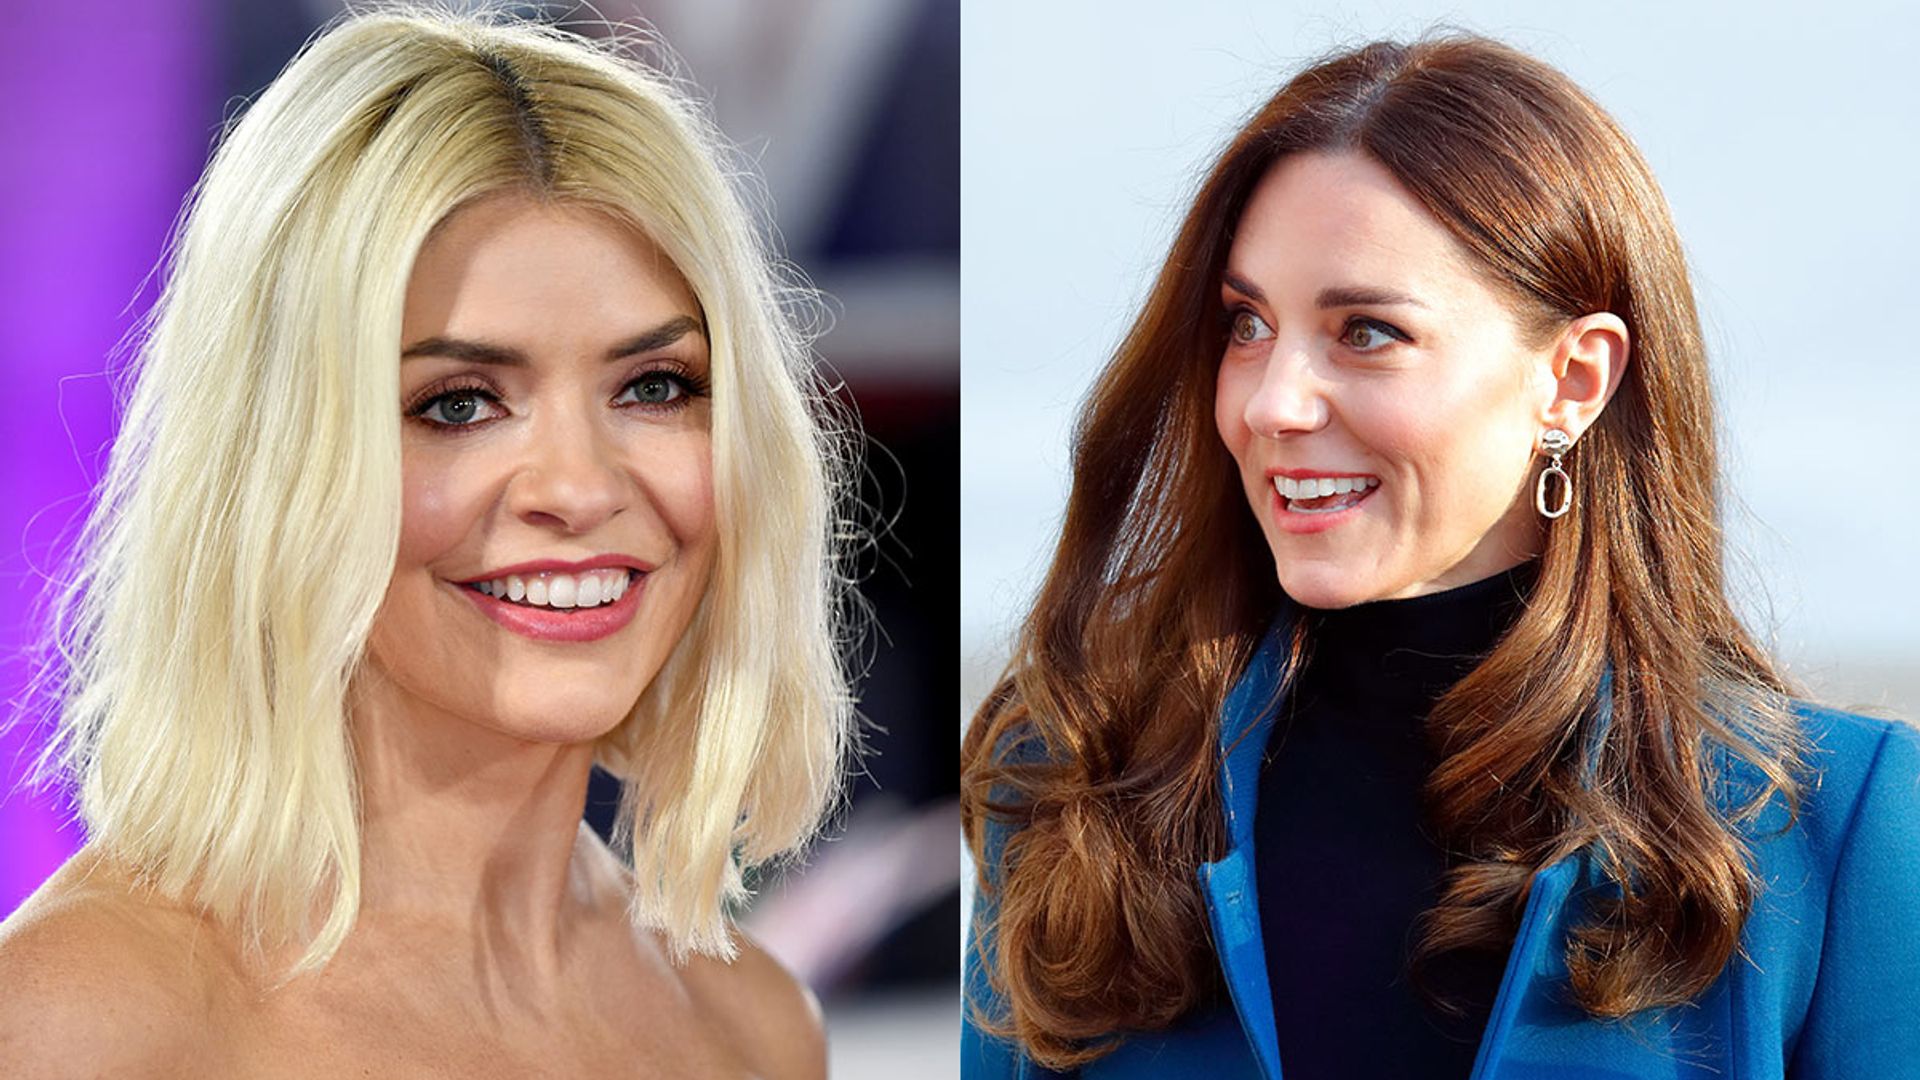 Kate Middleton is going to love Holly Willoughby's new outfit